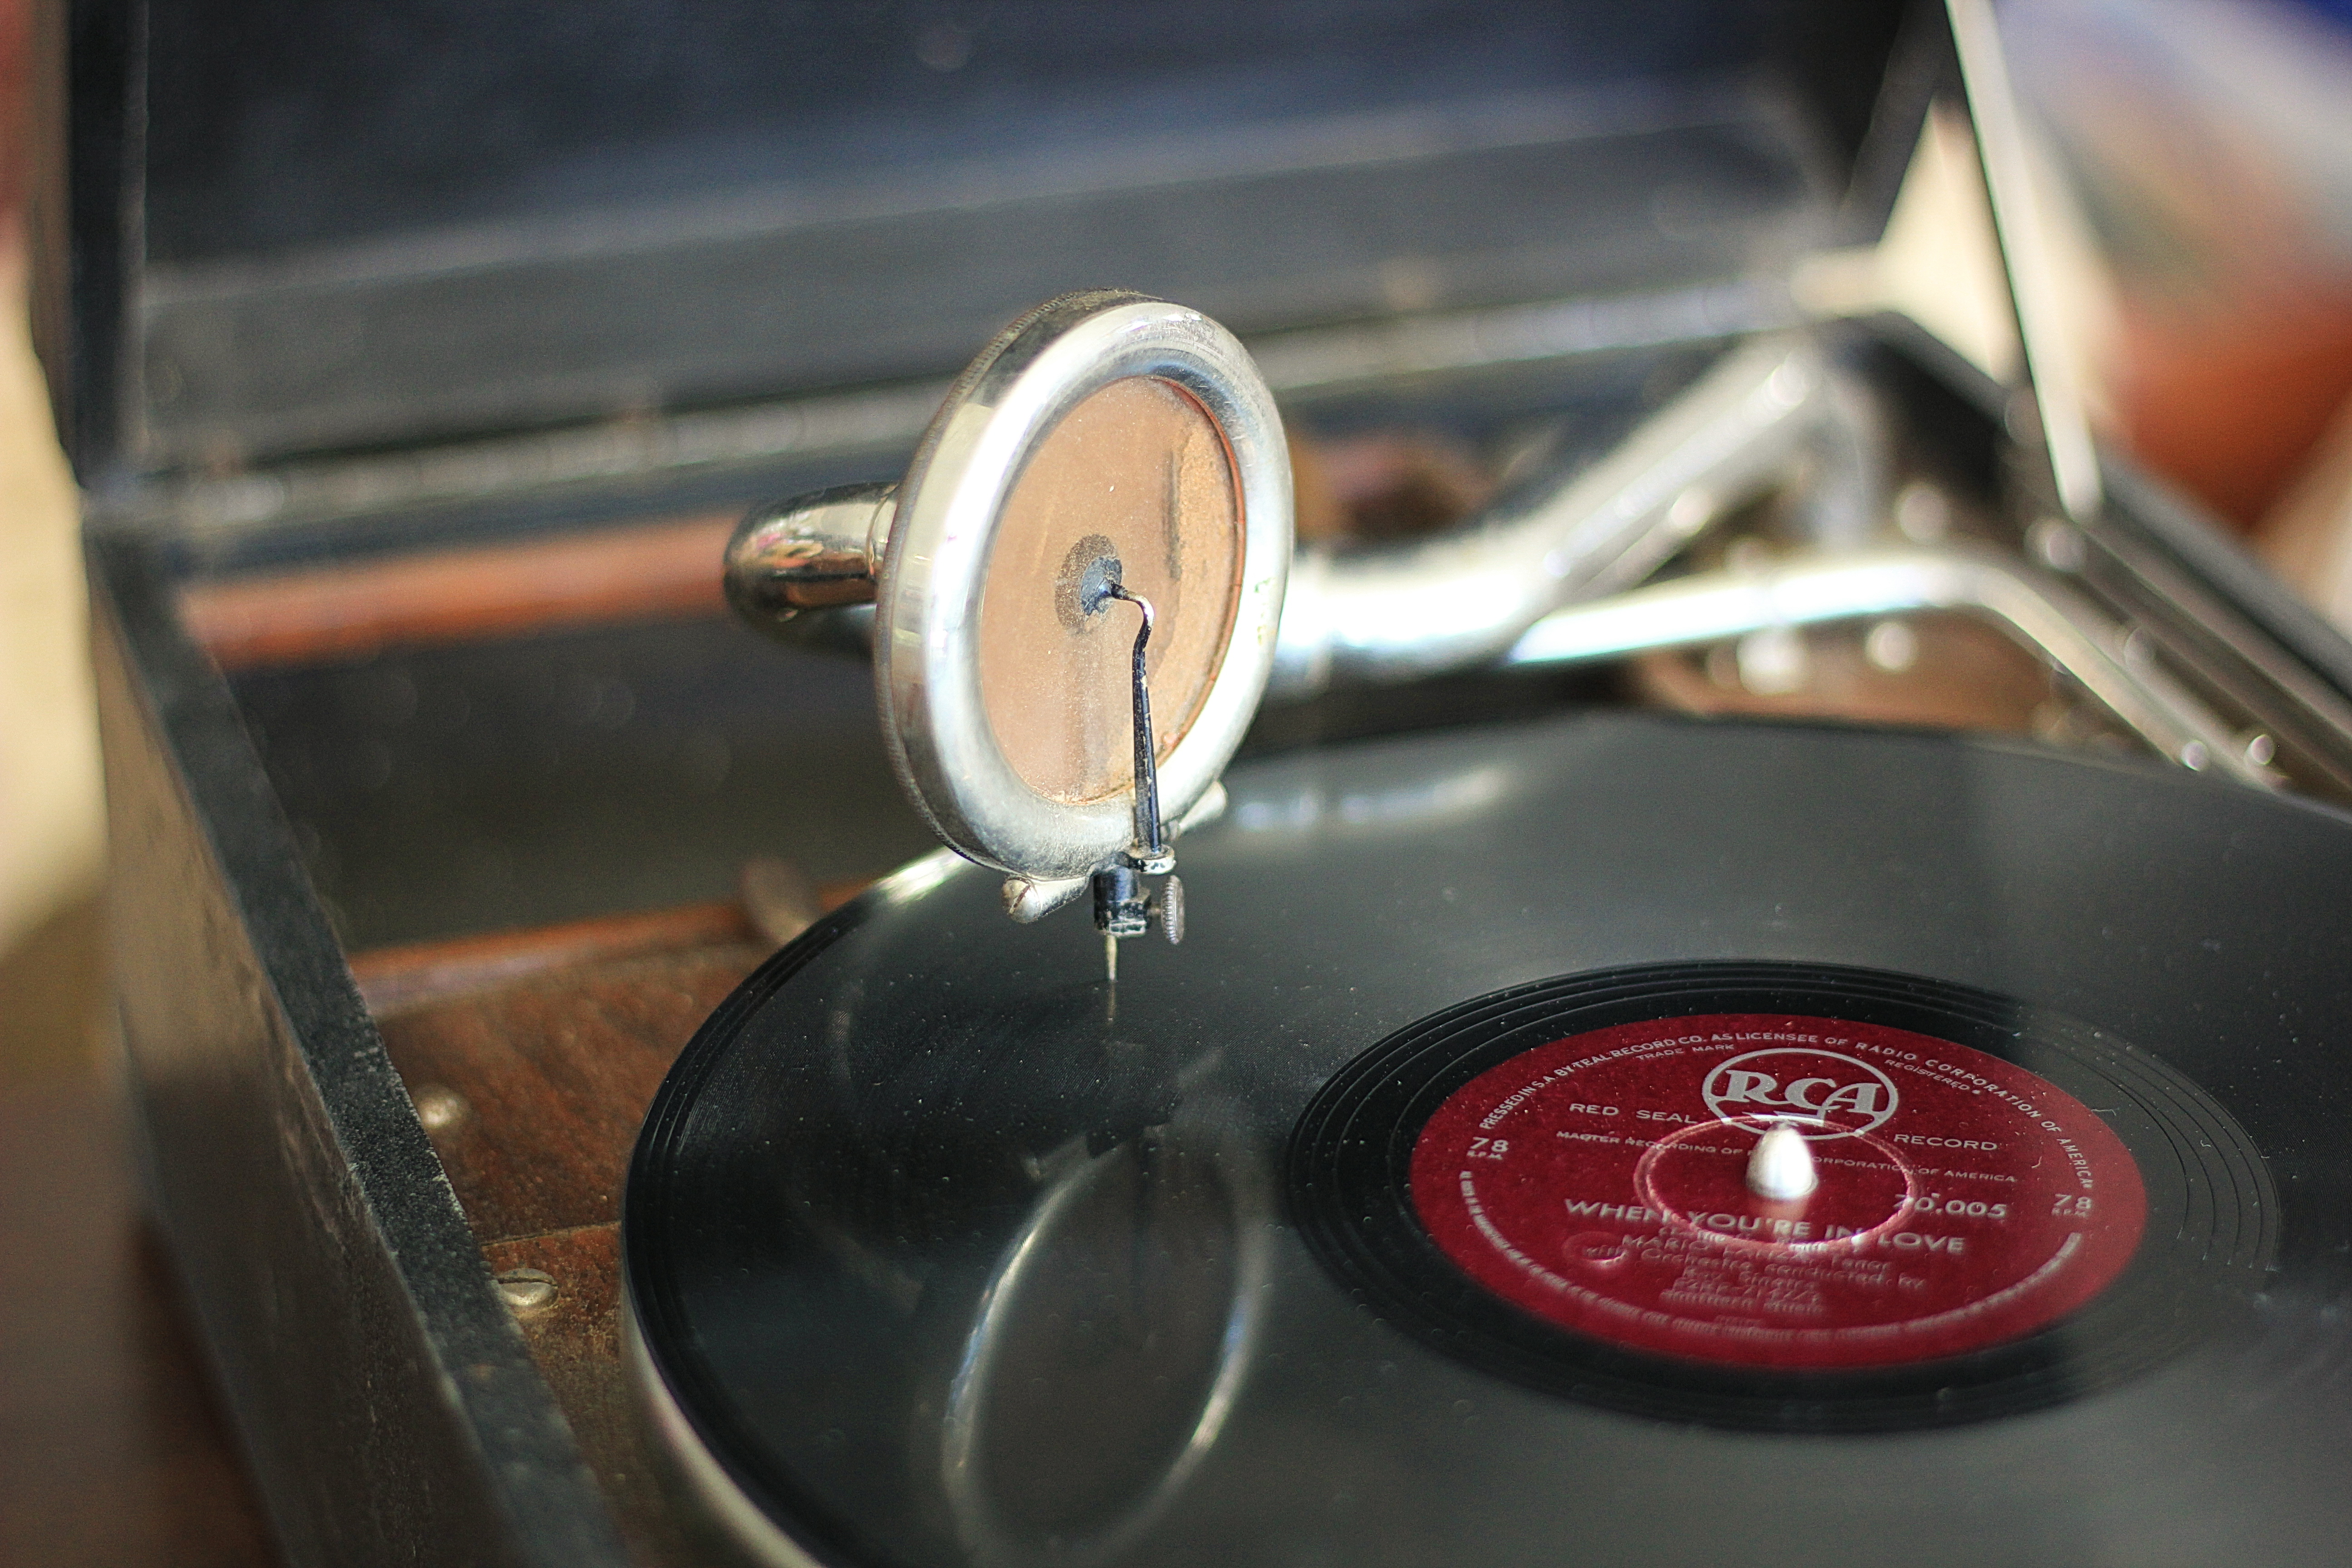  His Master’s Voice, a Victrola and the sweet sounds of Mario Lanza. Image: Chris Marais